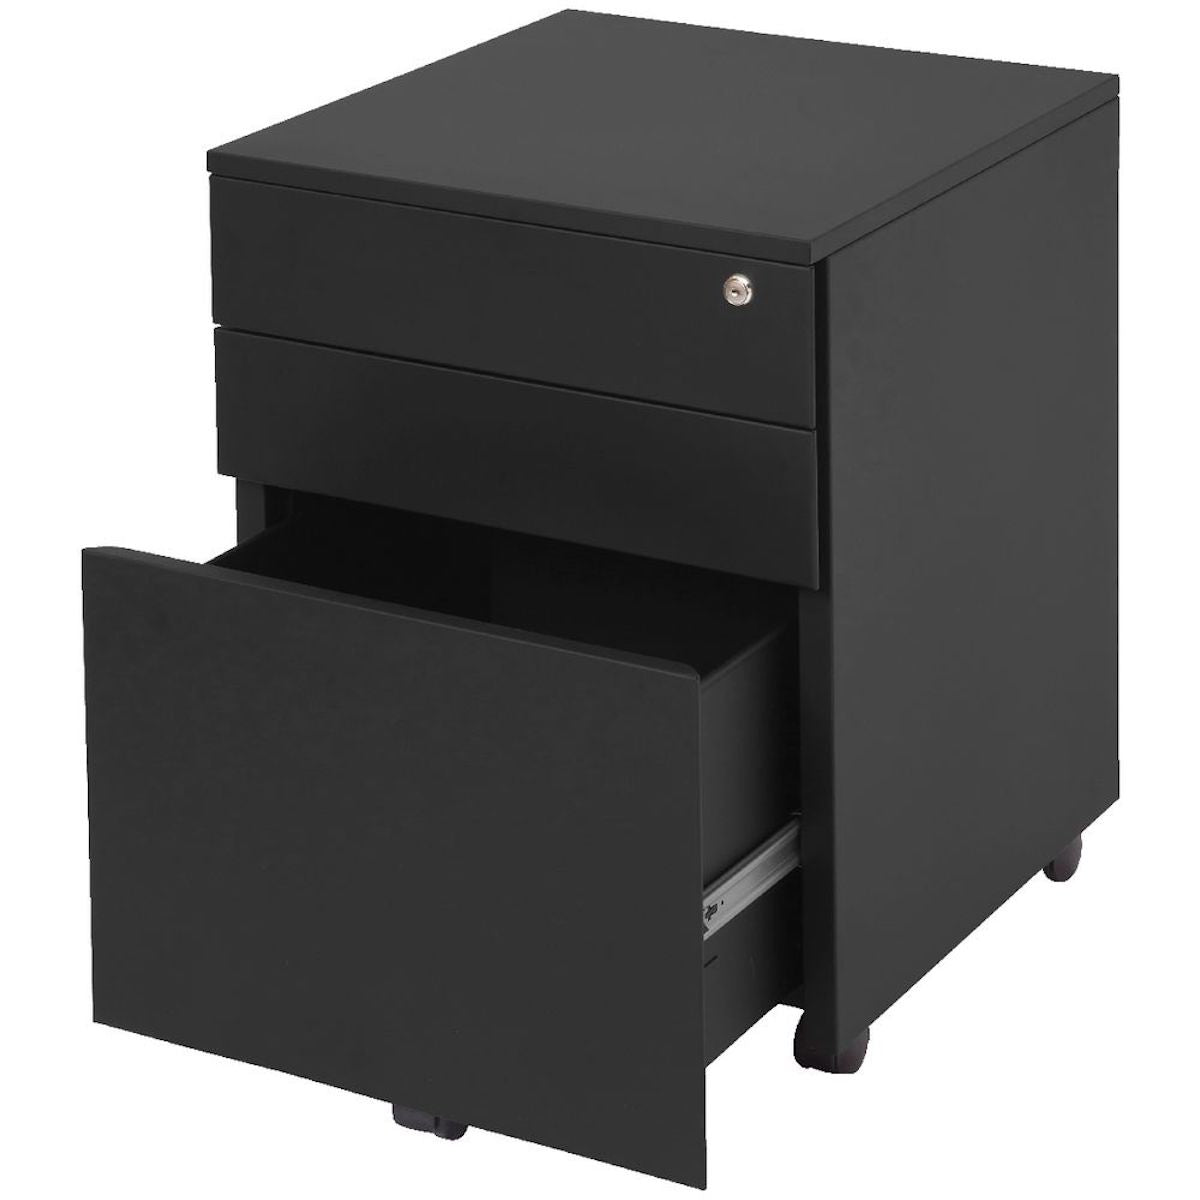 ERGOWORKS - EW-2D1F - 3 DRAWERS MOBILE PEDESTAL DRAWER WITH KEY LOCK AND CASTORS (W407 X D475 X H665MM) 